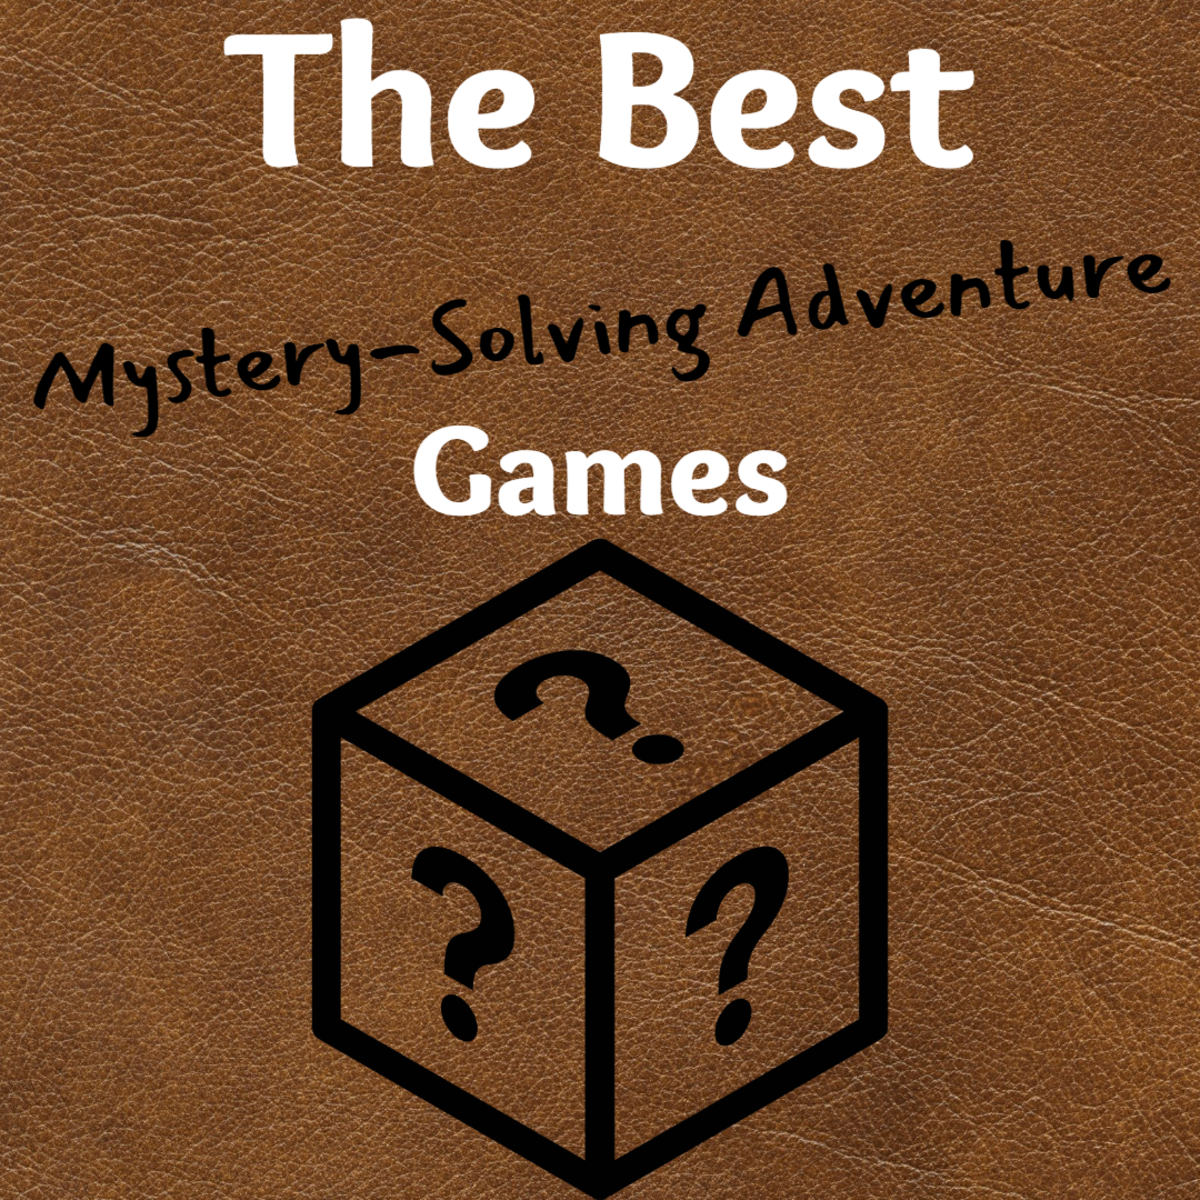 Top Mystery-Solving Adventure Games for PlayStation 3 and Xbox 360